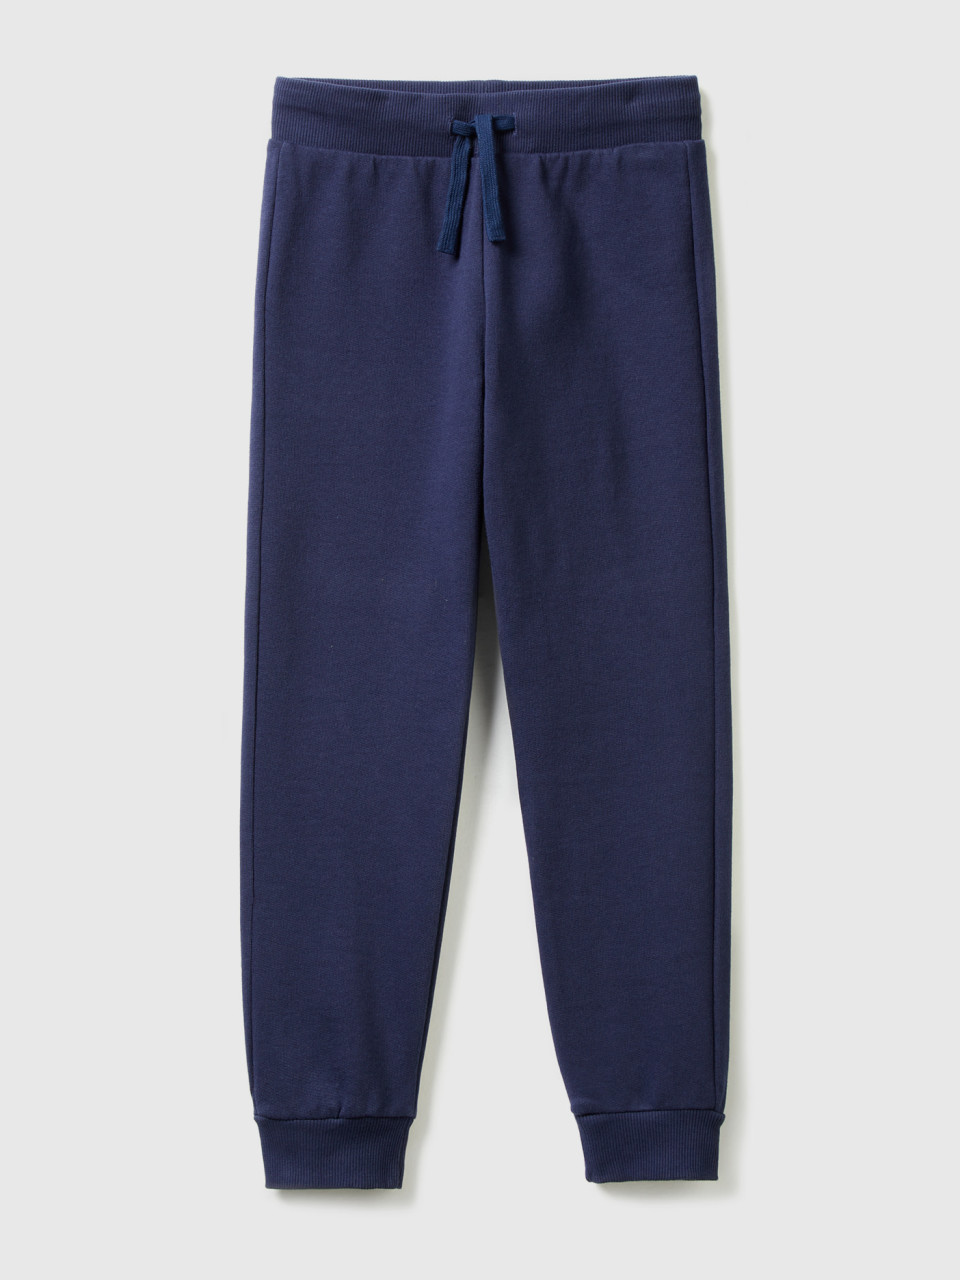 Benetton, Sporty Trousers With Drawstring, Dark Blue, Kids